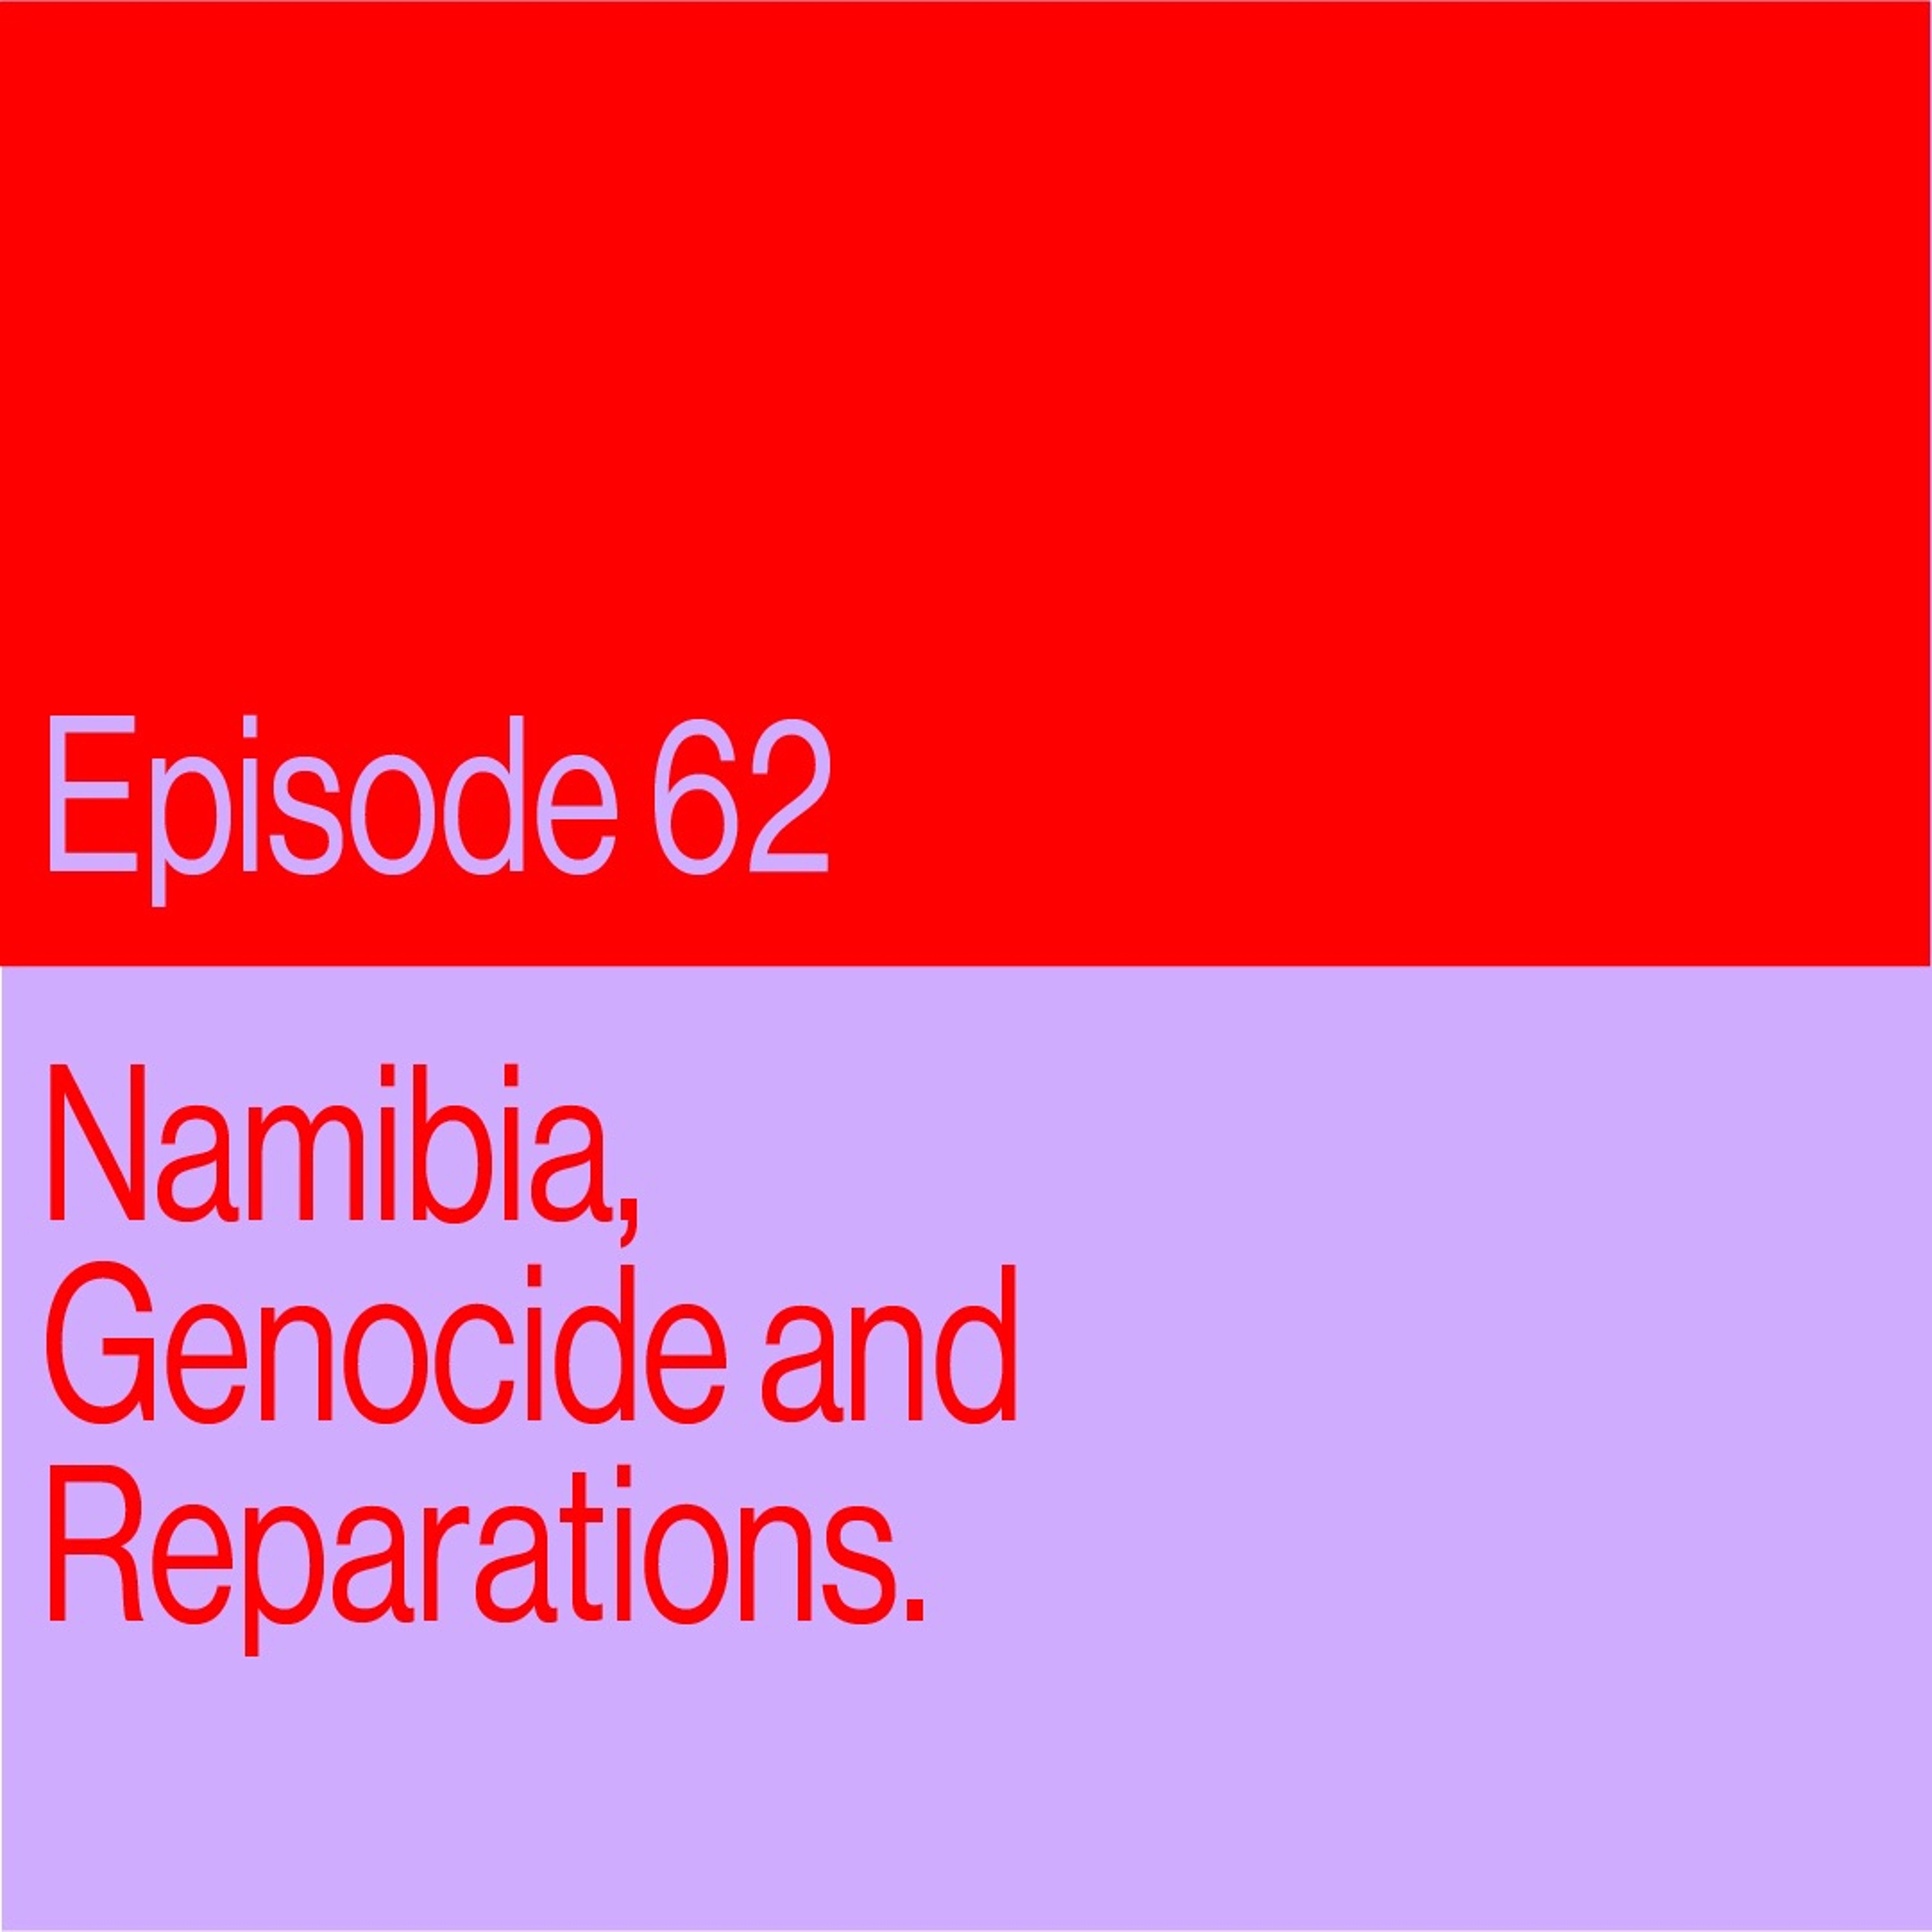 Episode 62: Namibia, Genocide And Reparations